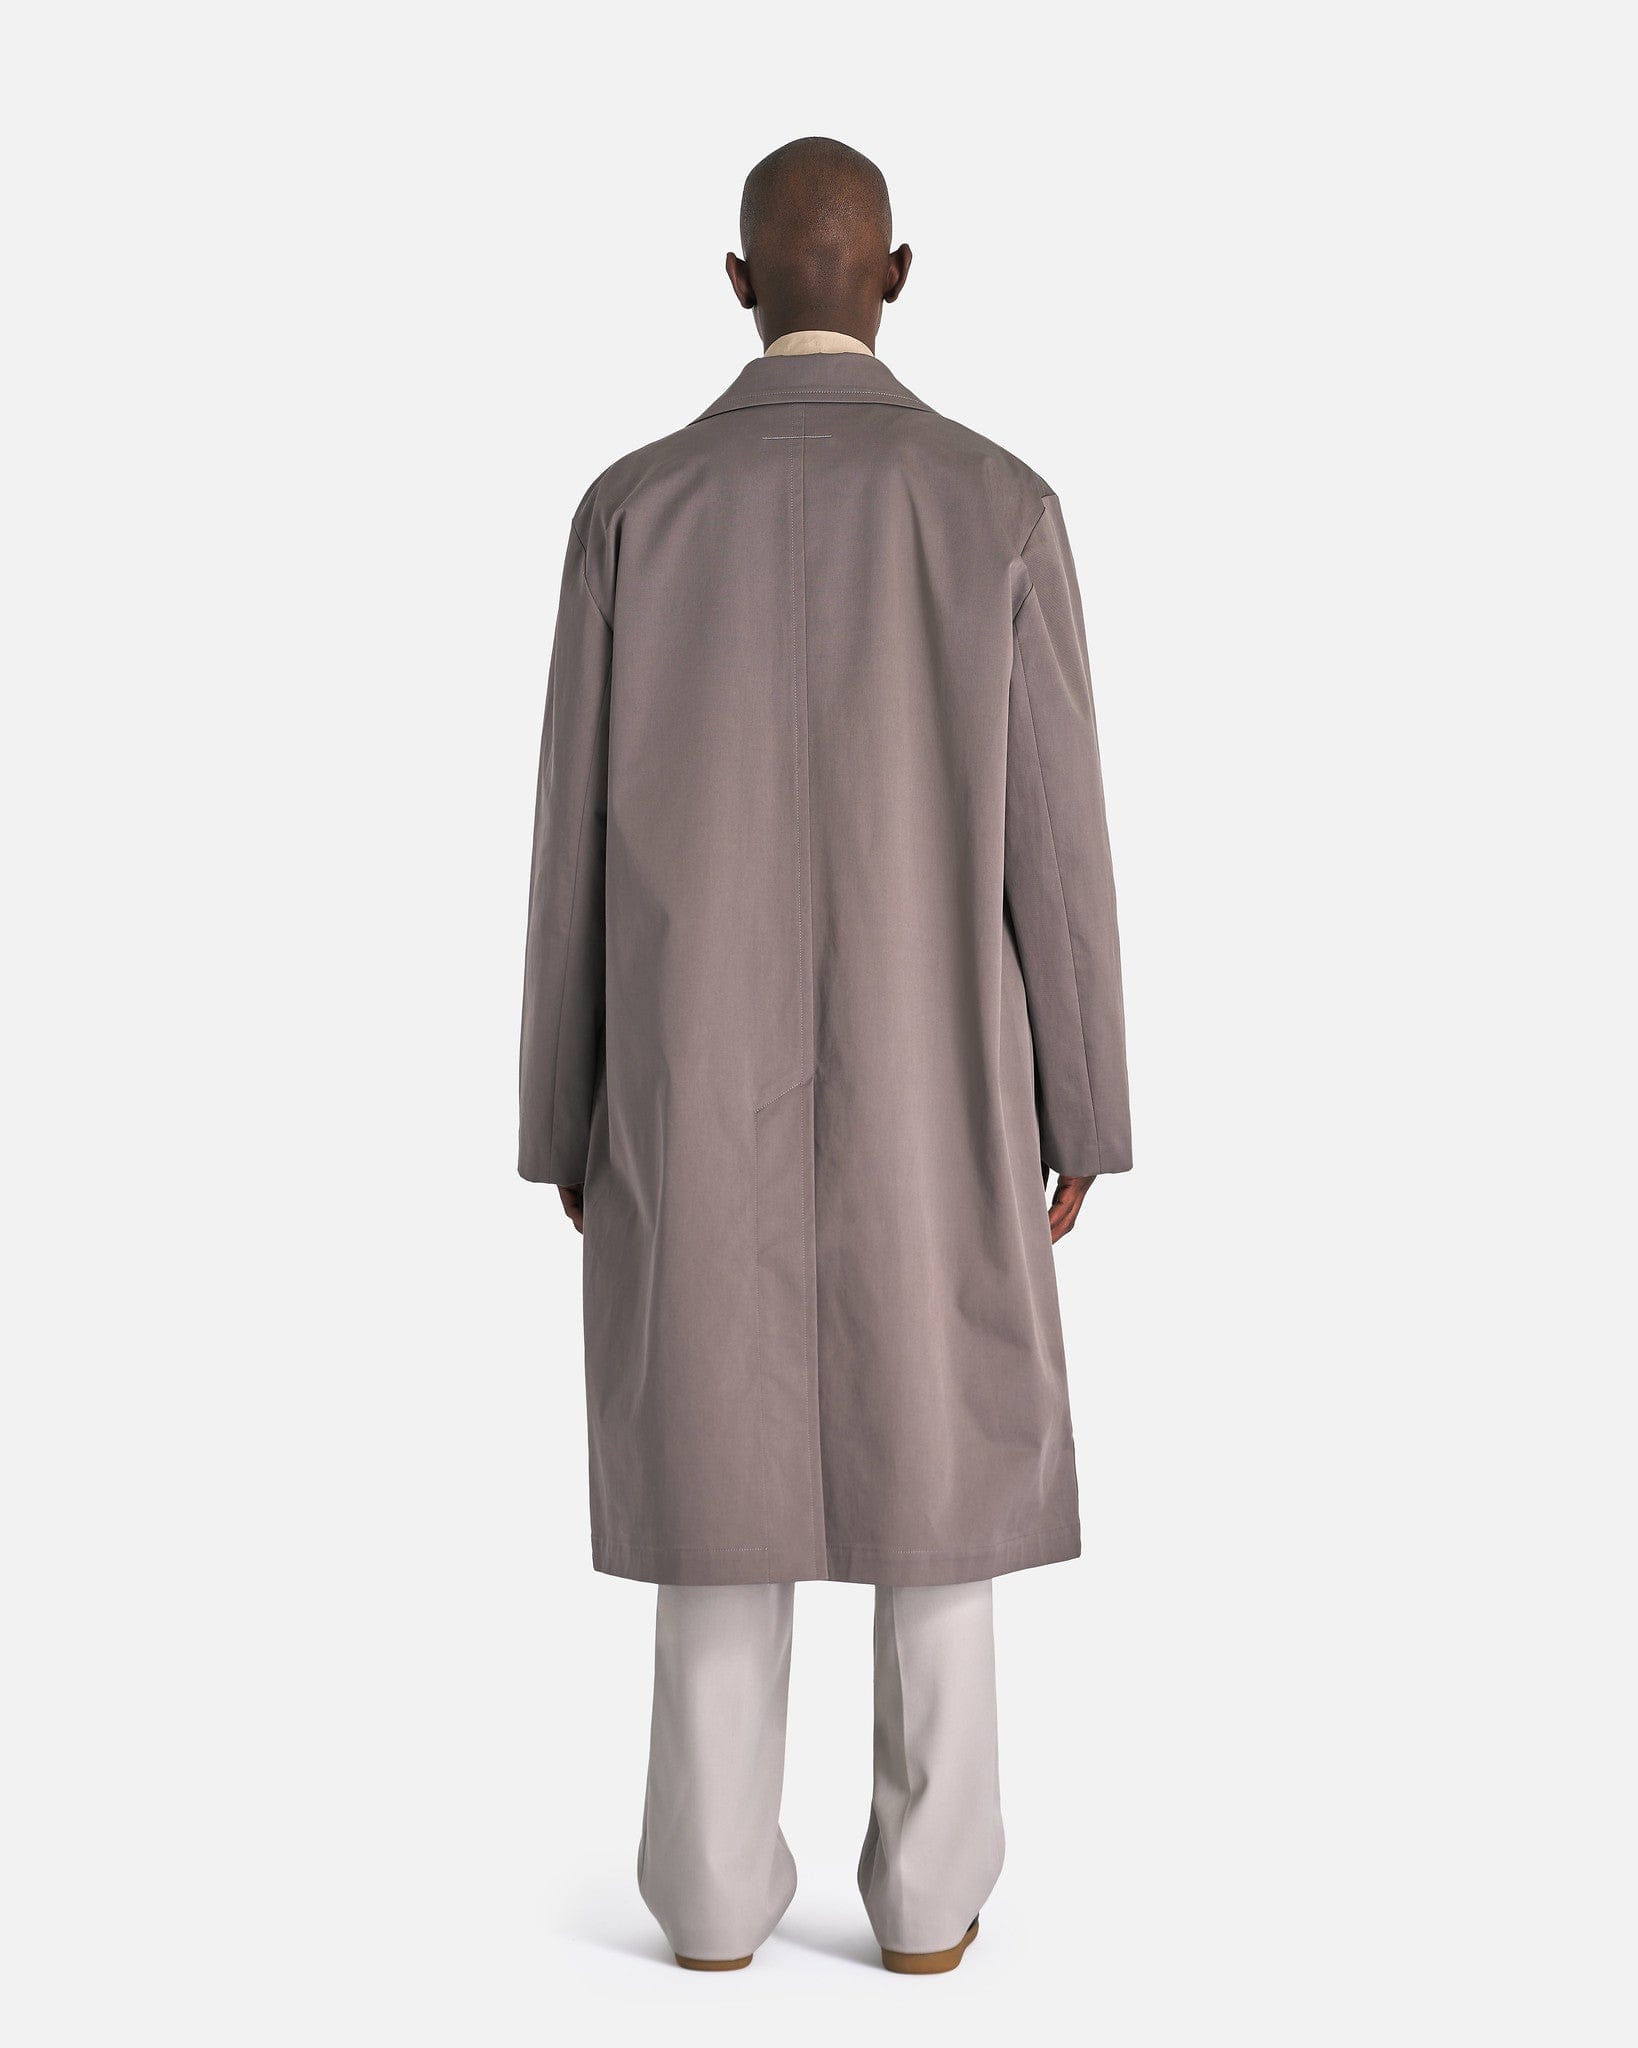 MM6 Maison Margiela Men's Jackets Cotton Twill Trench Coat in Taupe